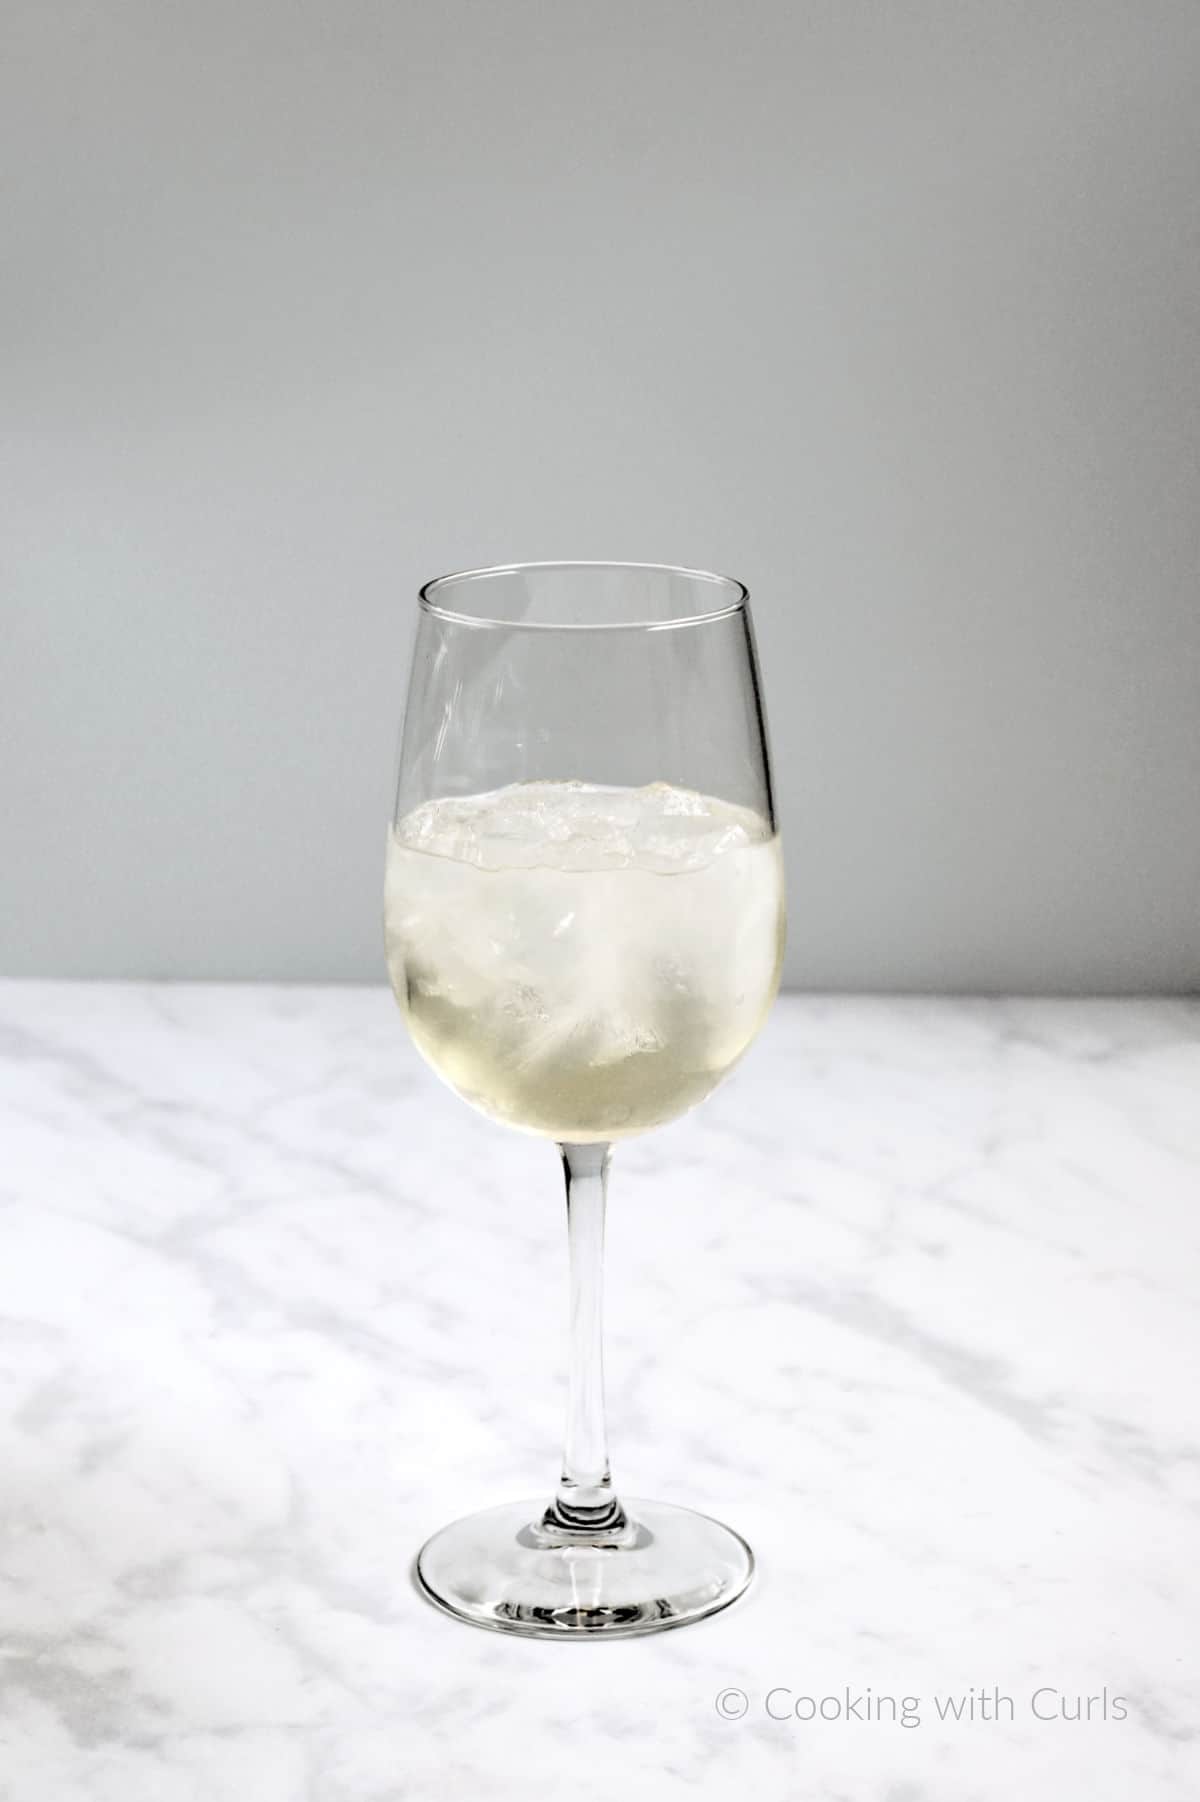 Moscato wine, elderflower liqueur, white grape juice, and ice cubes in a wine glass.